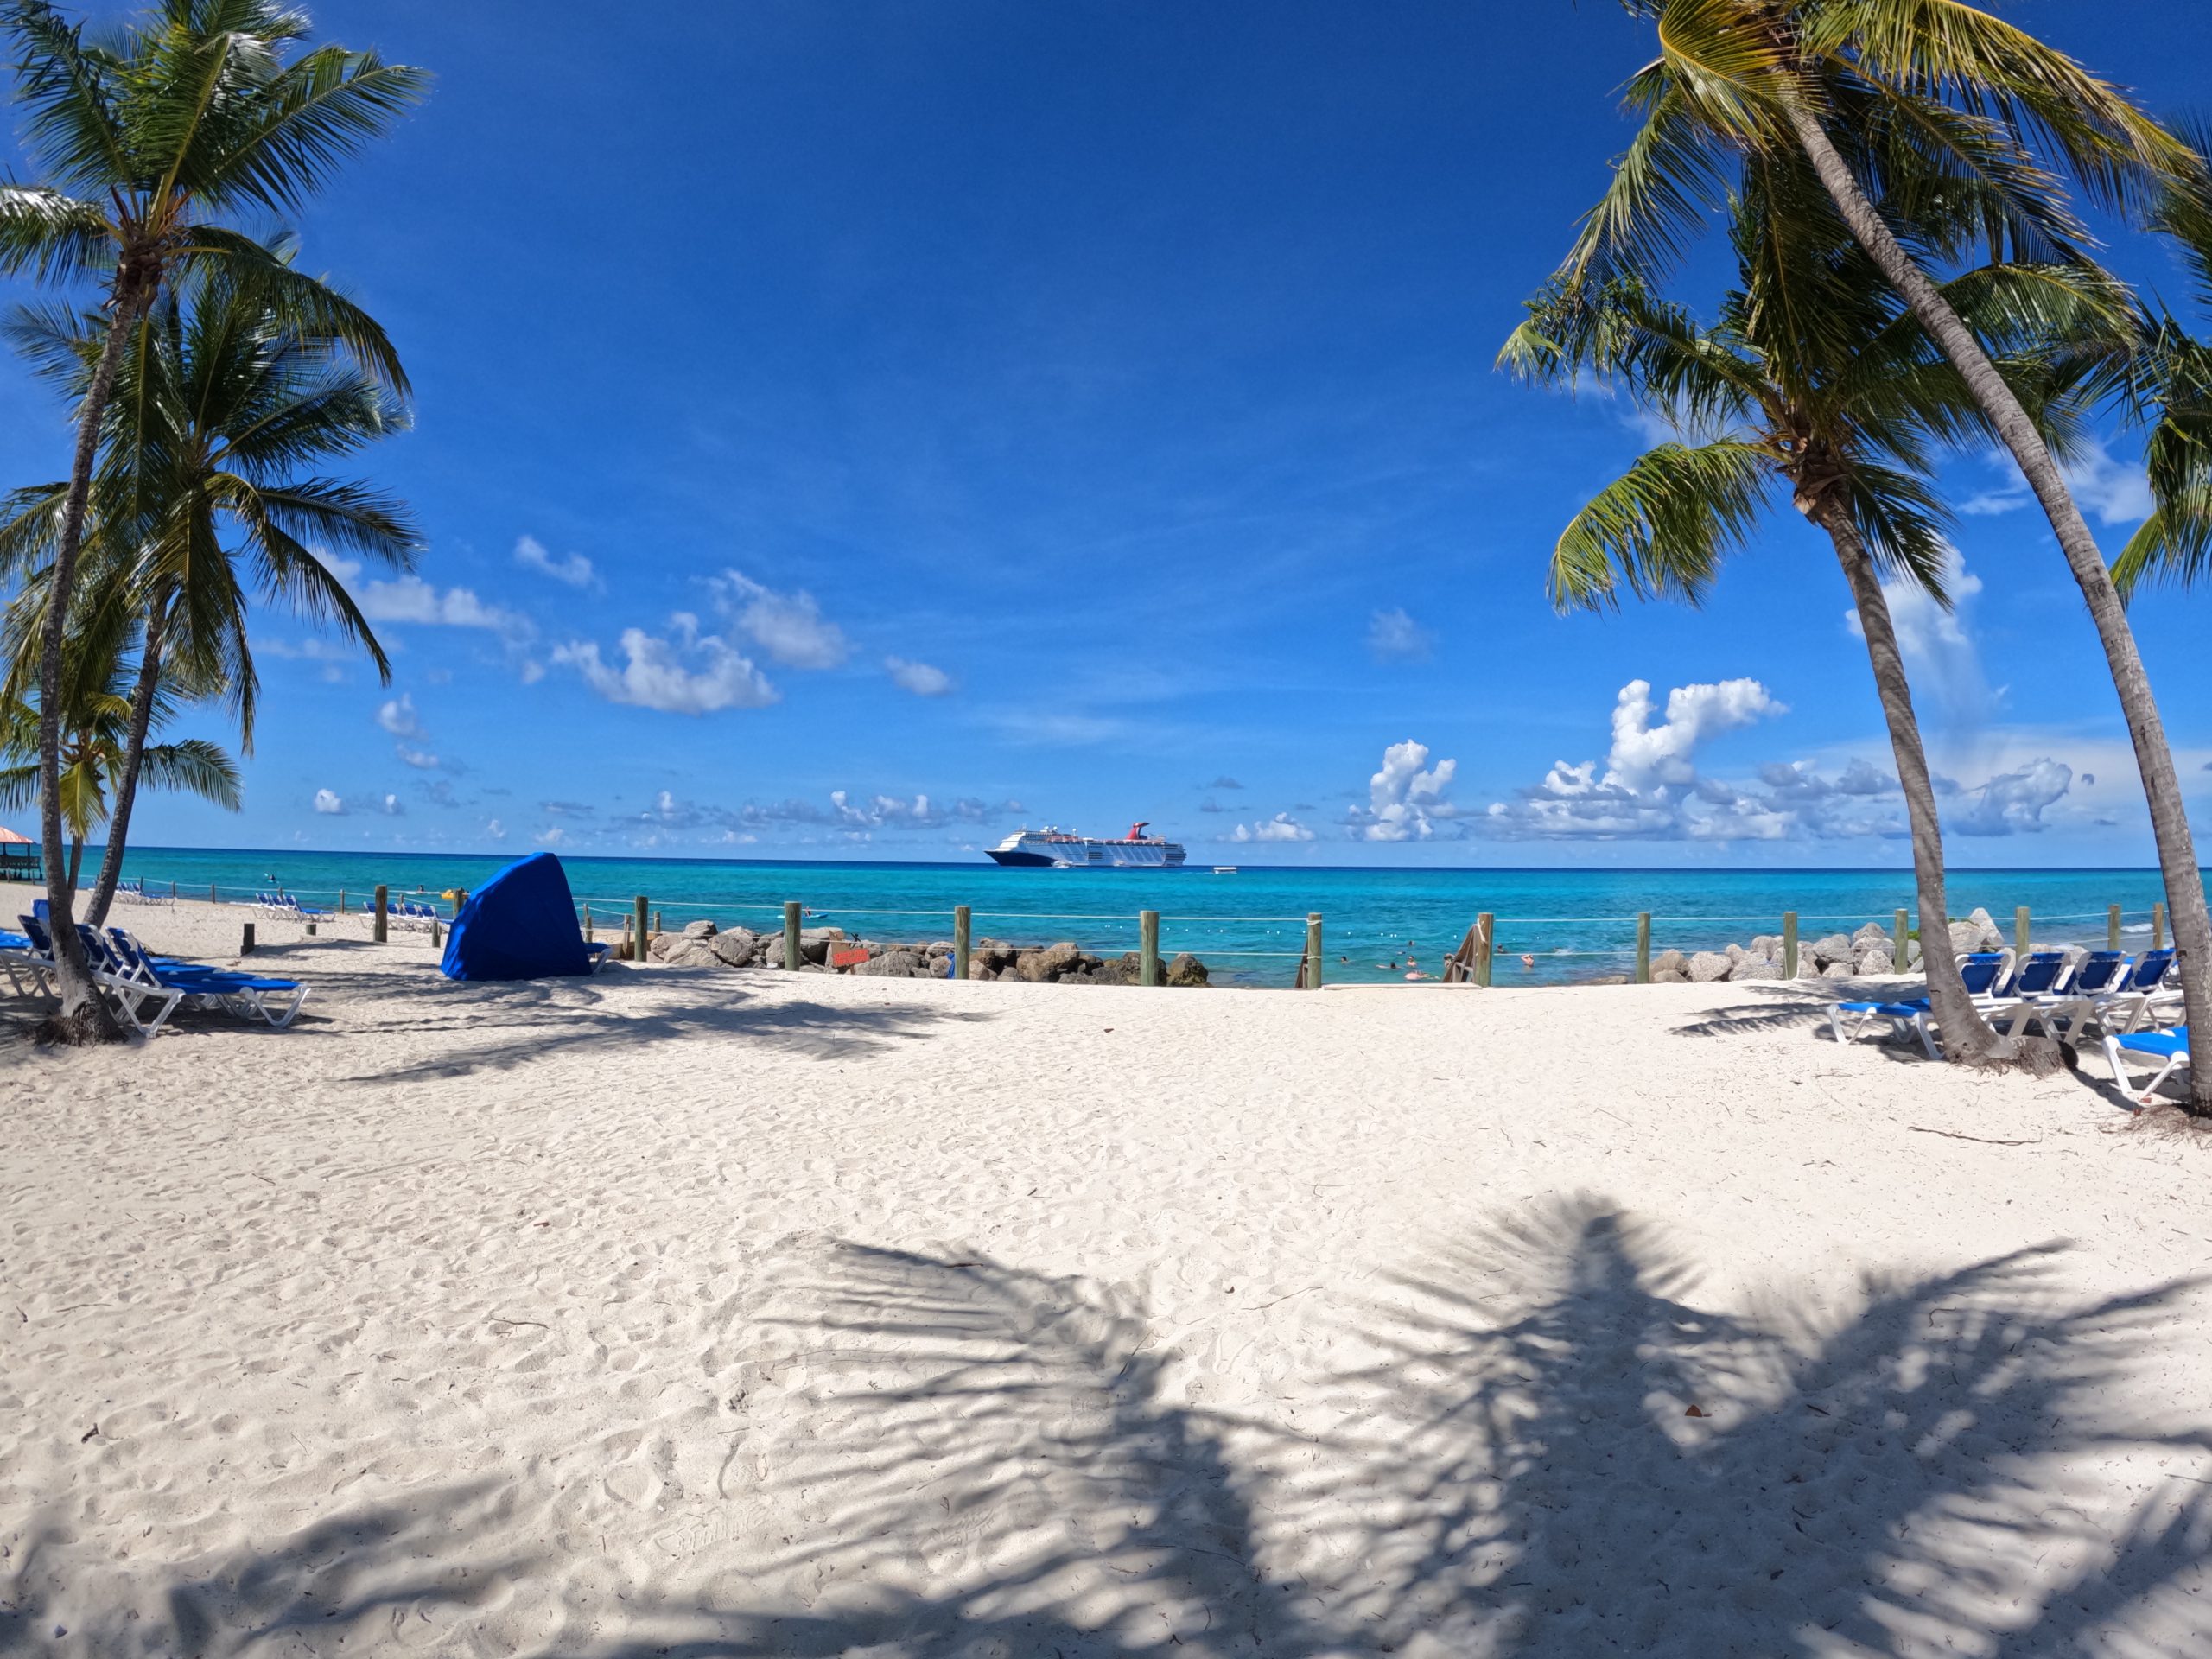 Why You Should Visit Carnival's Princess Cays